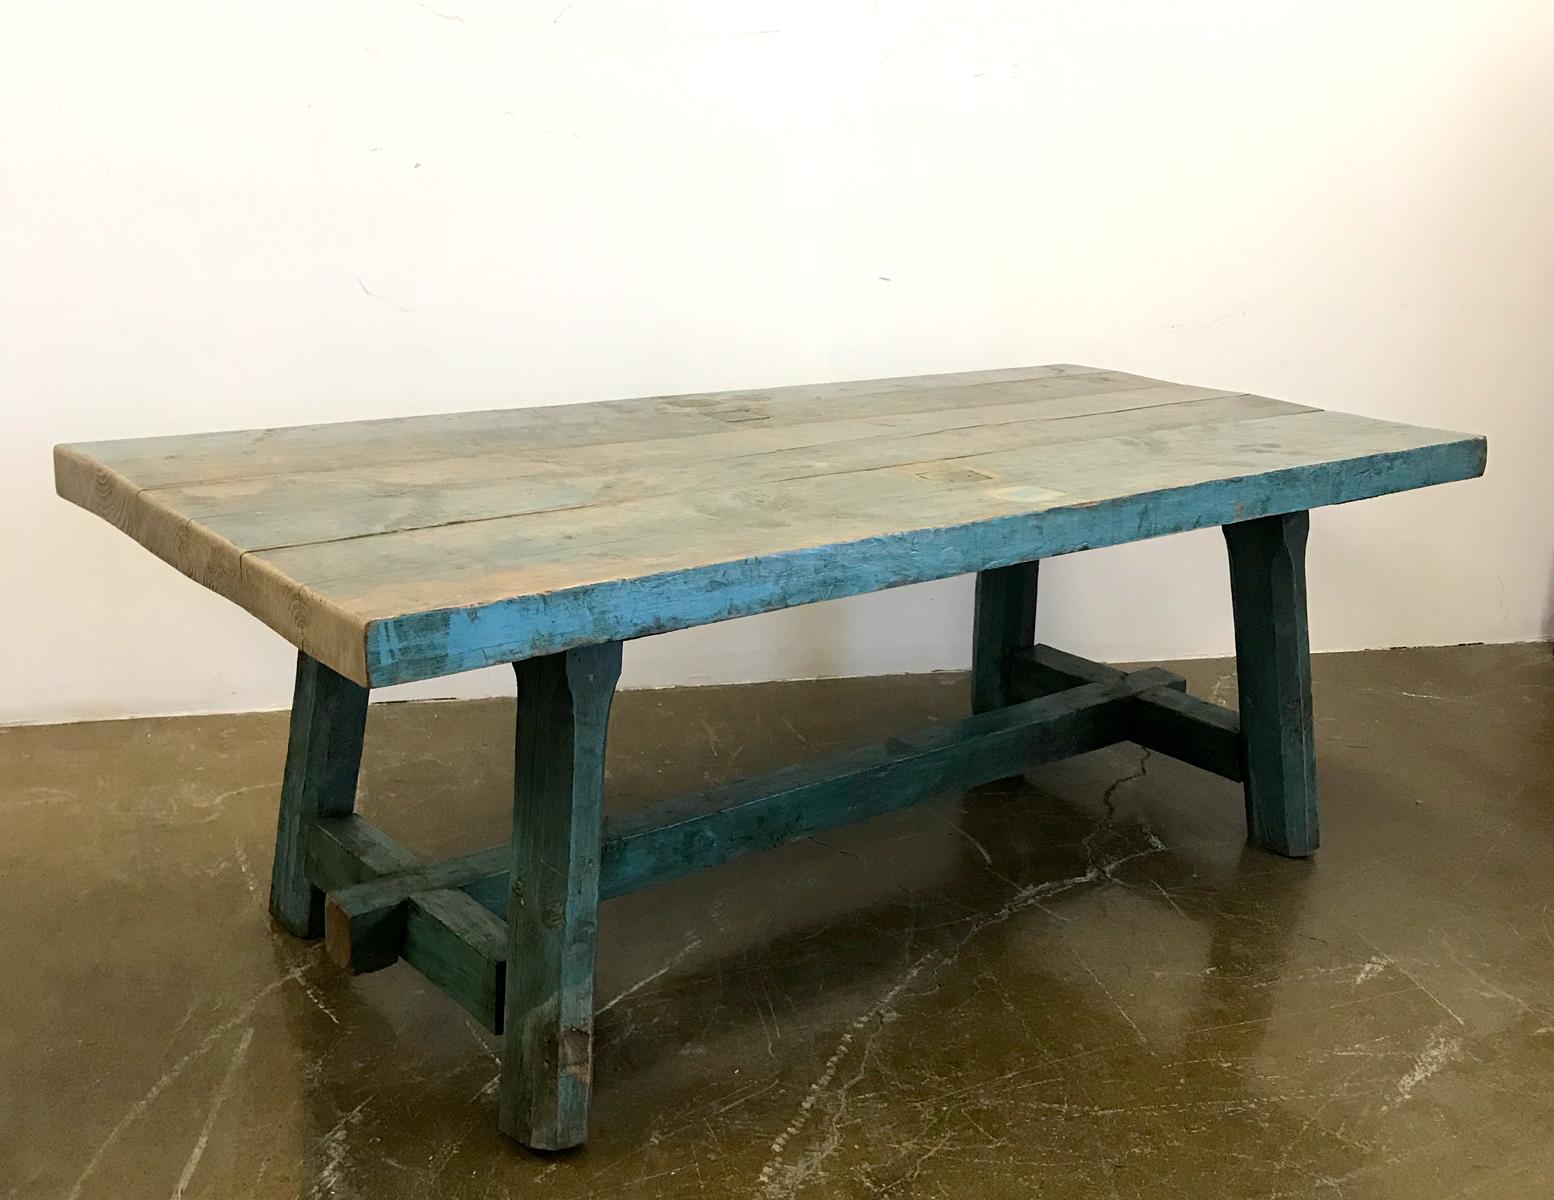 This table has been refashioned from a long skinny console into a fabulous rustic farm table. Original paint throughout. Sturdy construction. The boards are 14.25